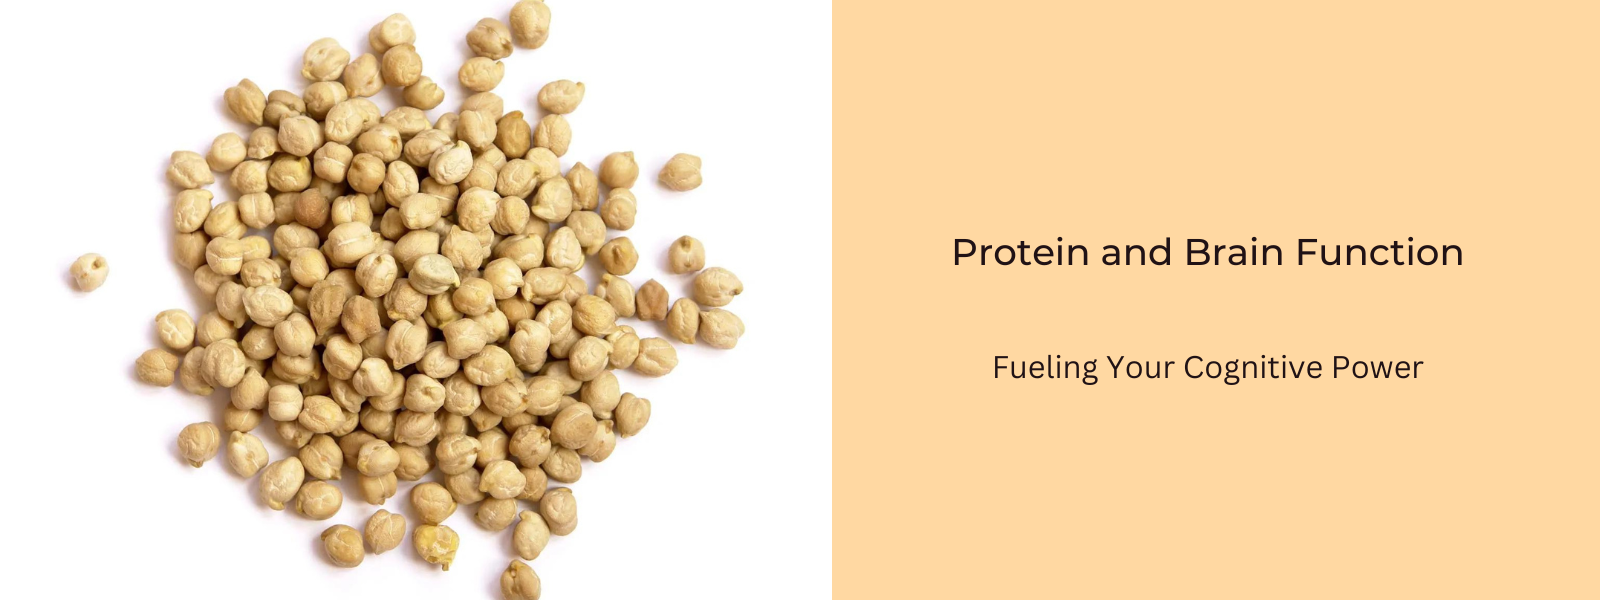 Protein and Brain Function: Fueling Your Cognitive Power